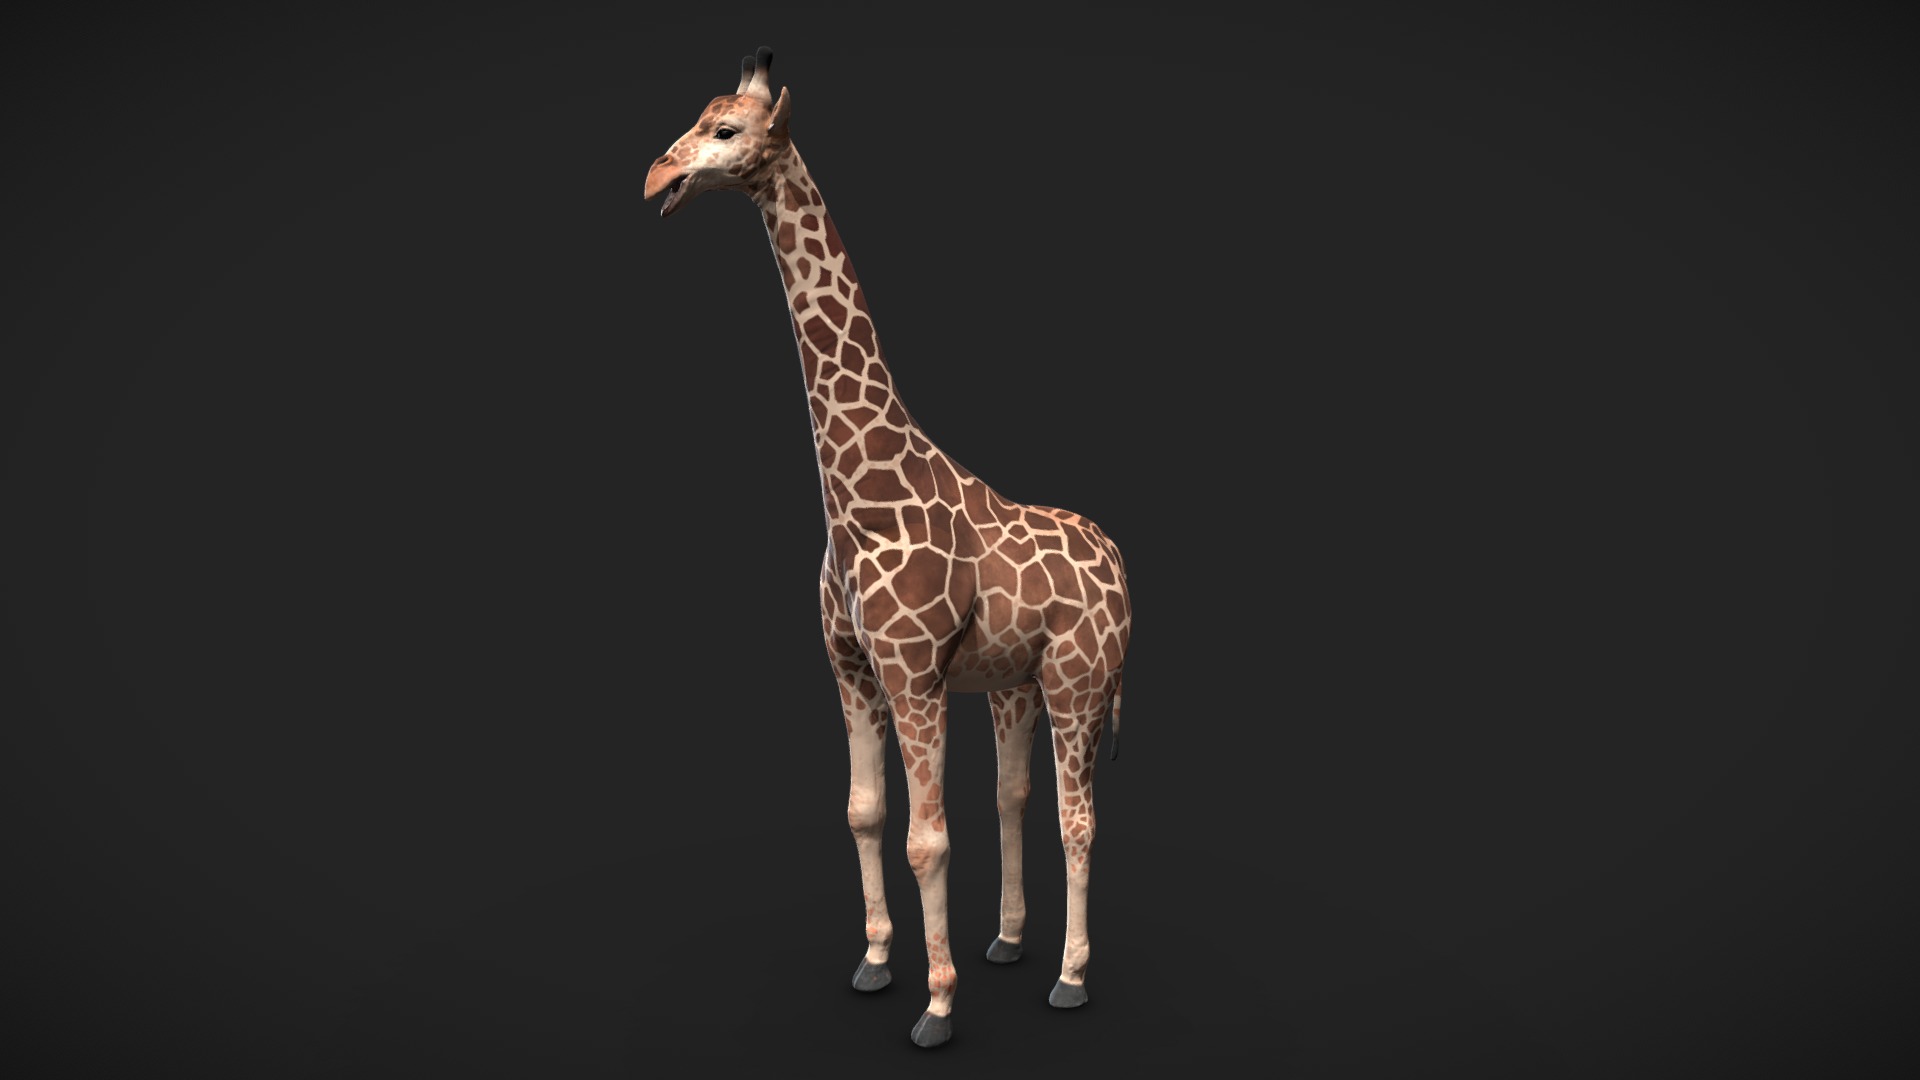 3D model Giraffe - This is a 3D model of the Giraffe. The 3D model is about a giraffe standing on a black background.